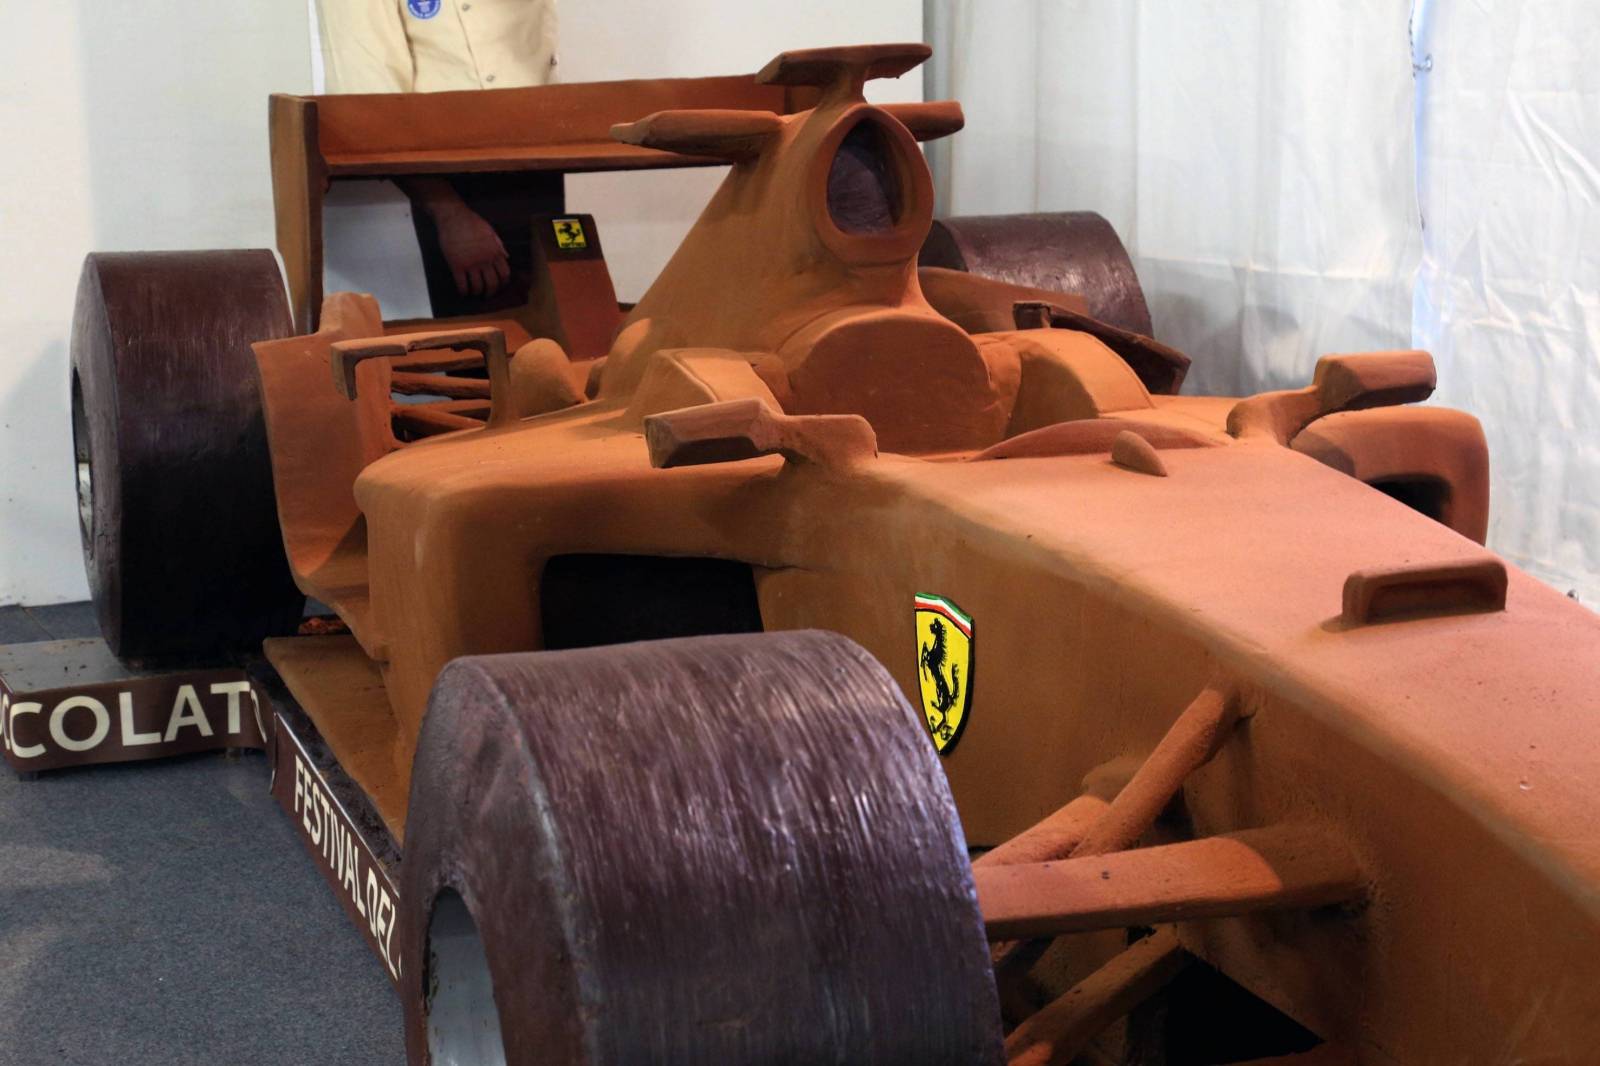 A chocolate reproduction of the Ferrari F2004, the most successful car driven by Michael Schumacher